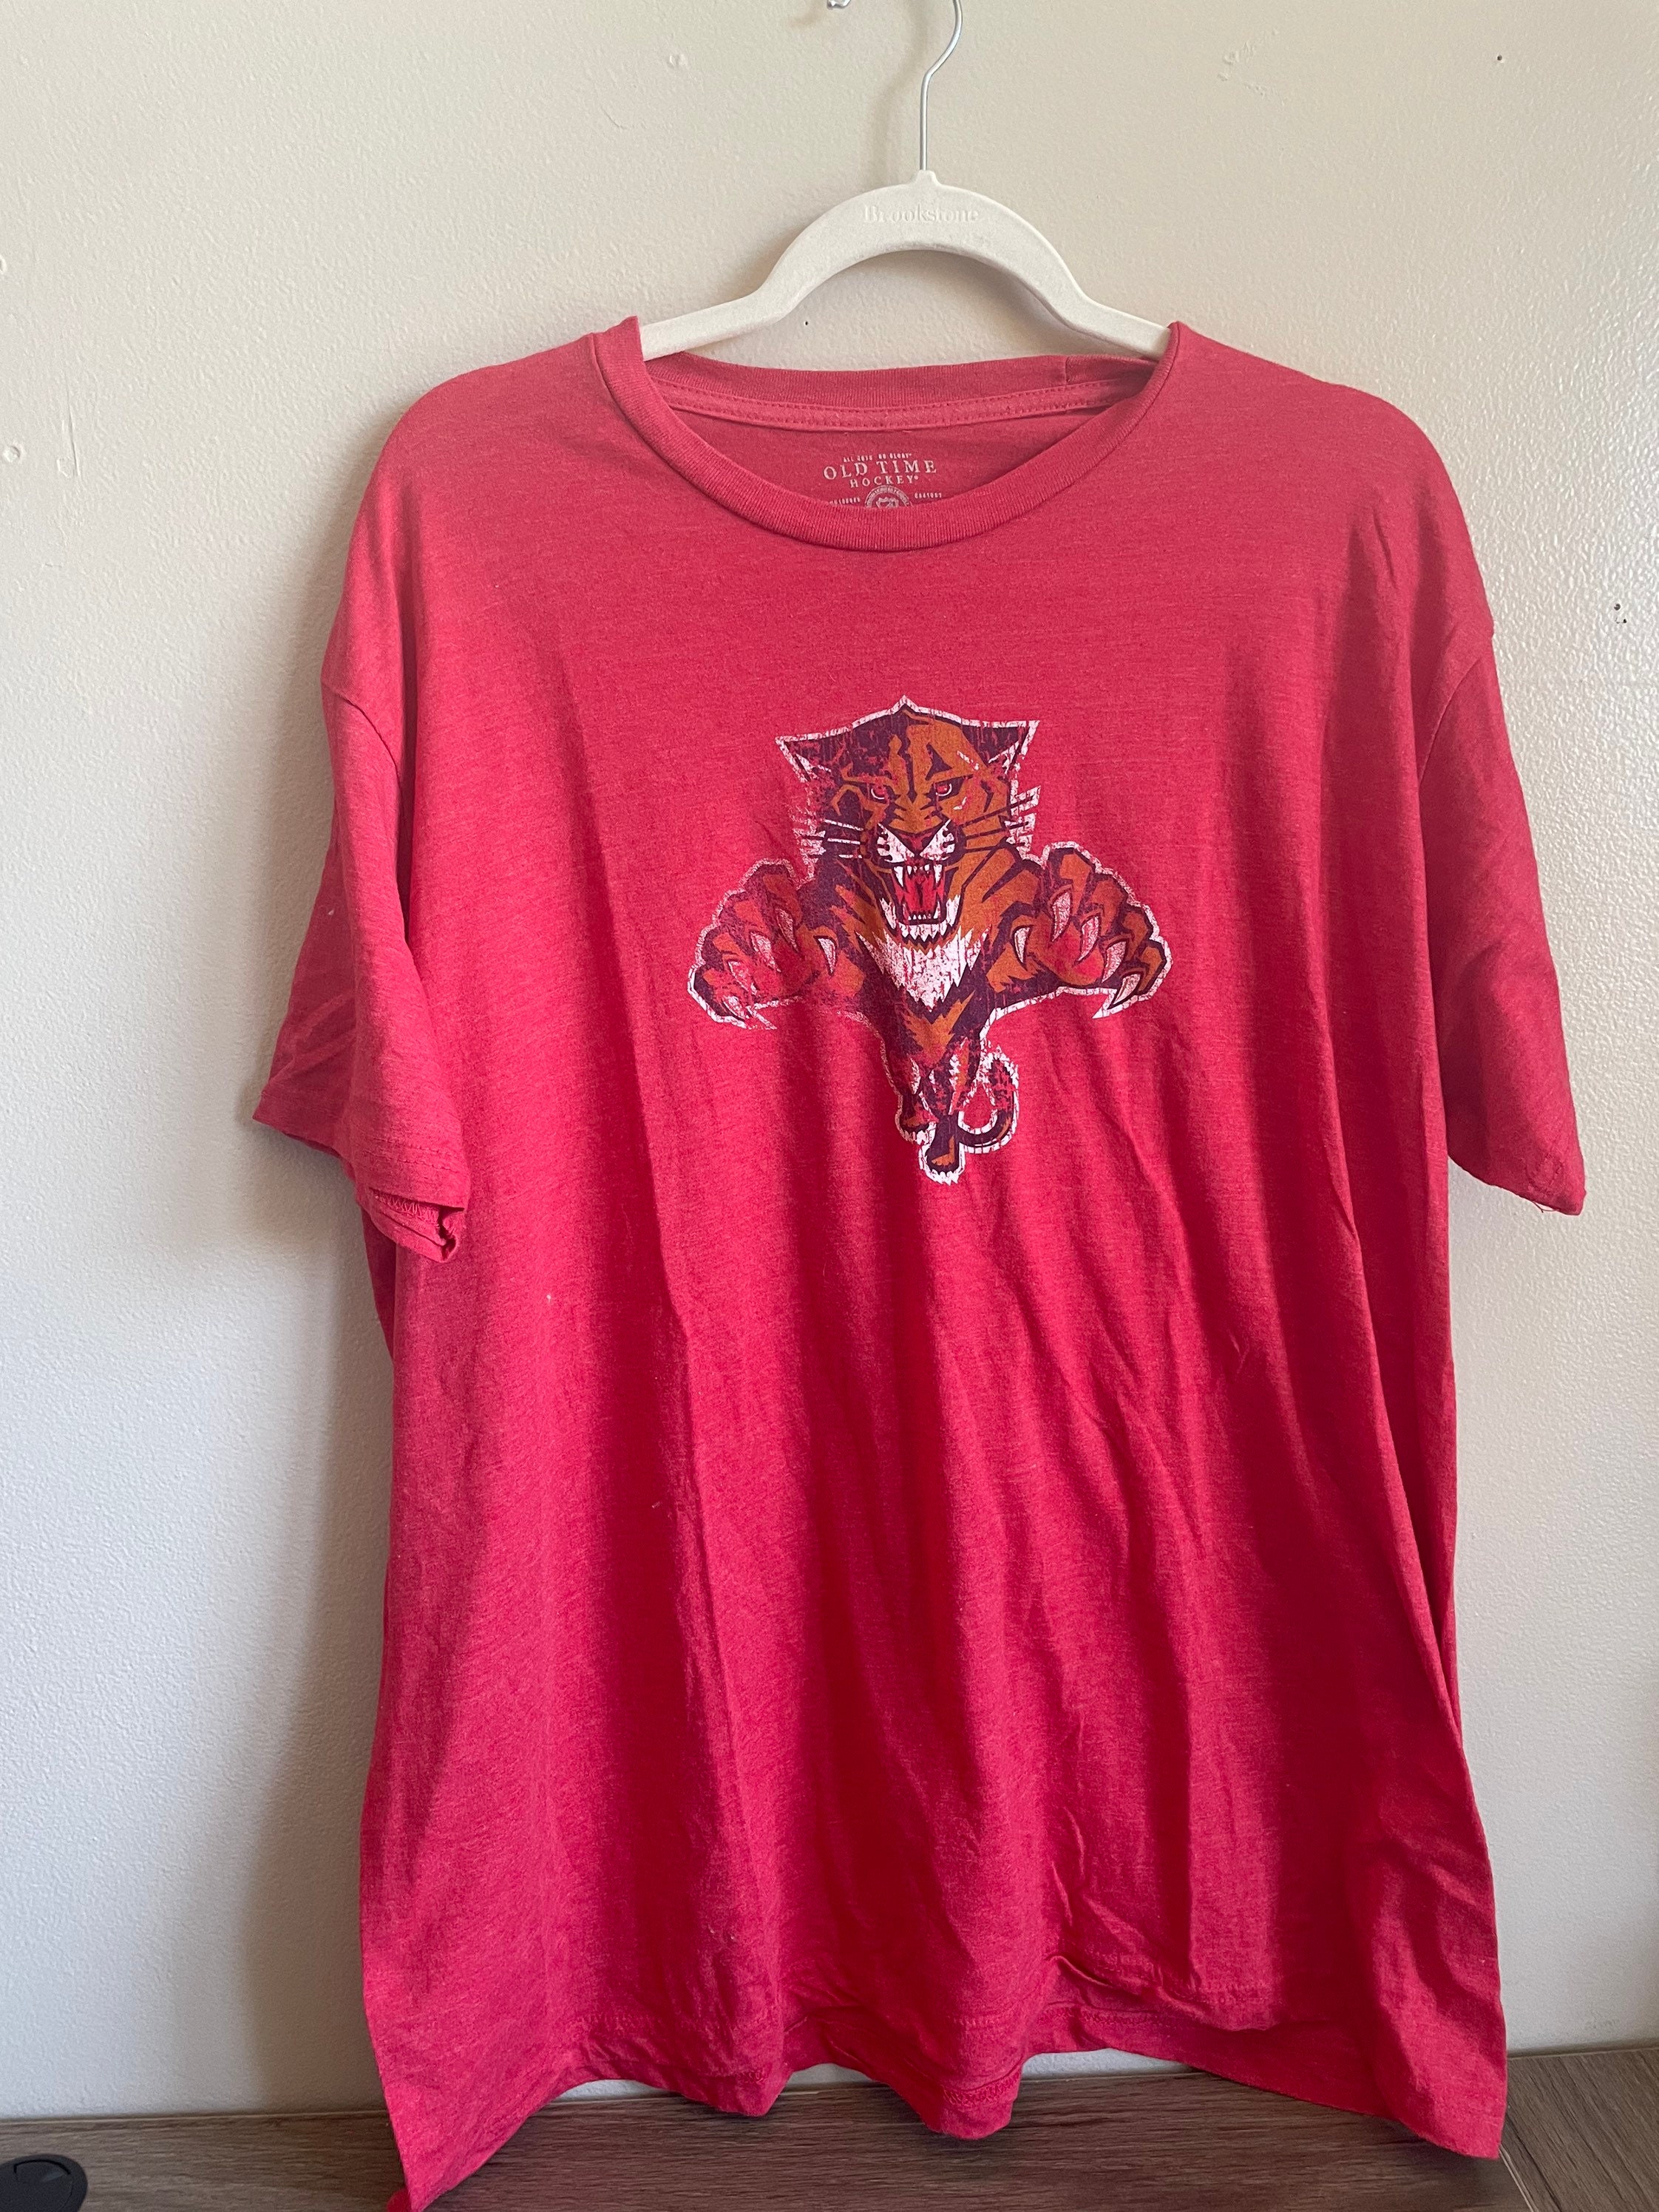 Personalized NHL Florida Panthers Special Lavender - Fight Cancer T-Shirt -  Torunstyle - Mellowtie